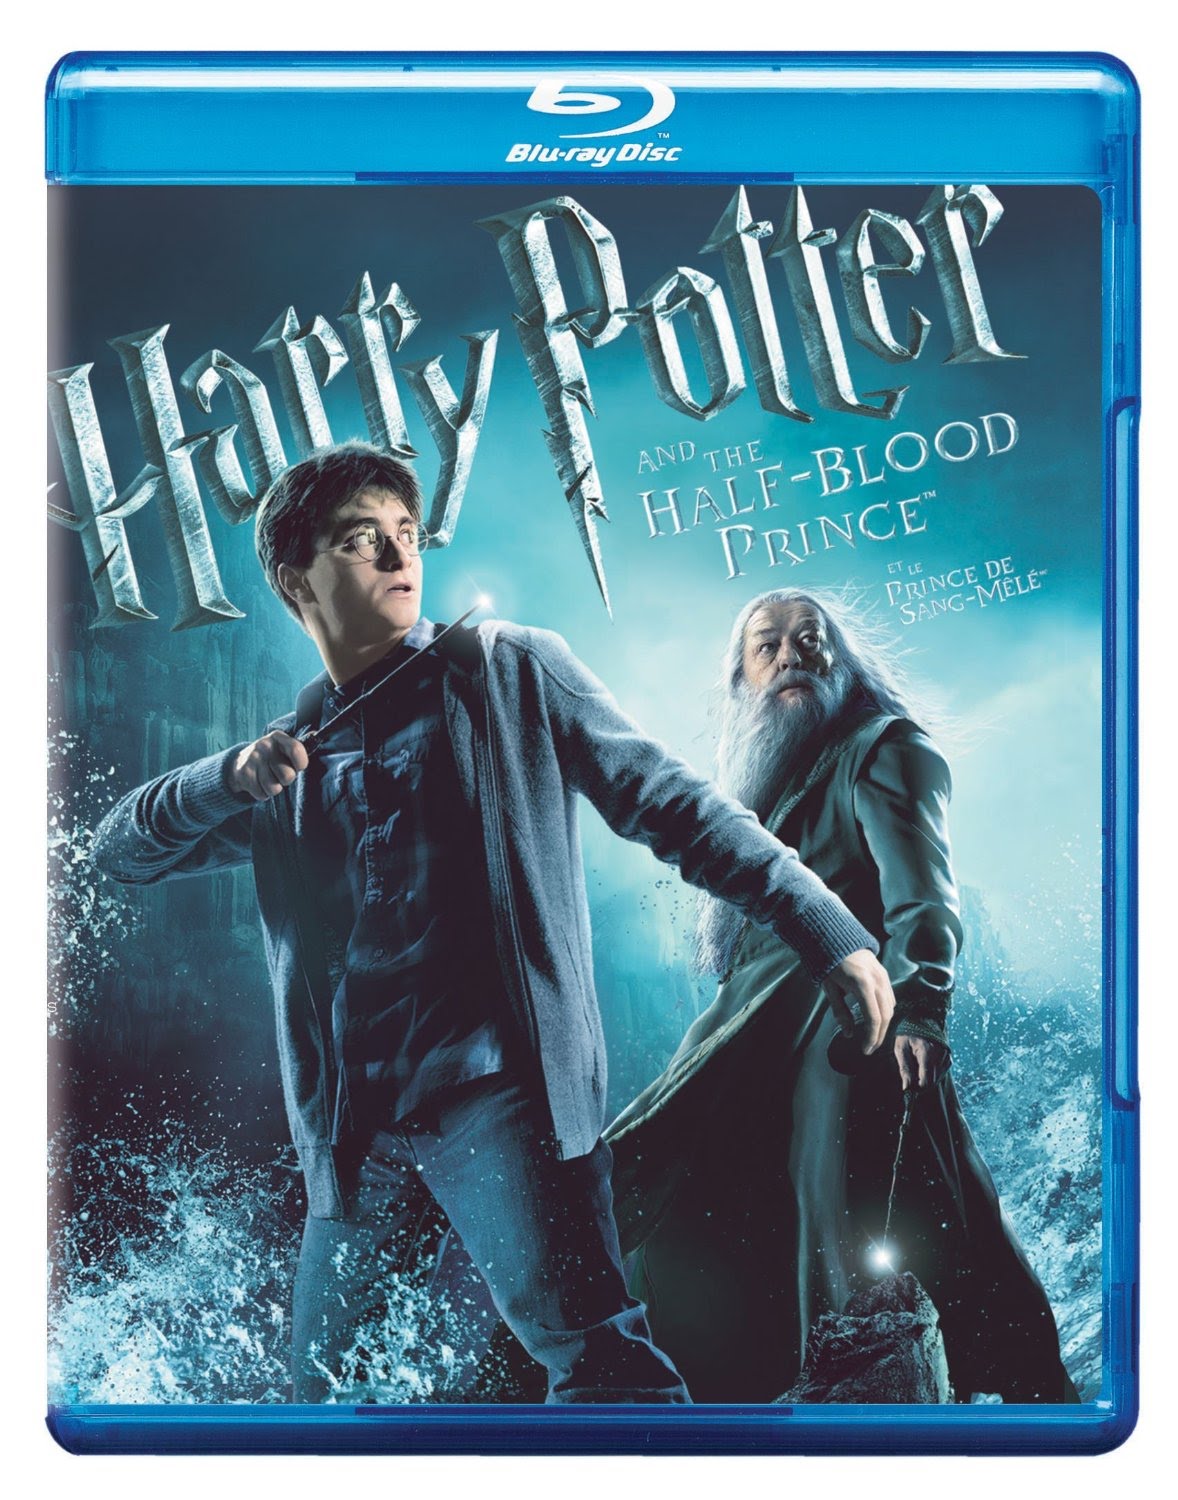 Harry Potter and the Half-Blood Prince for ipod instal